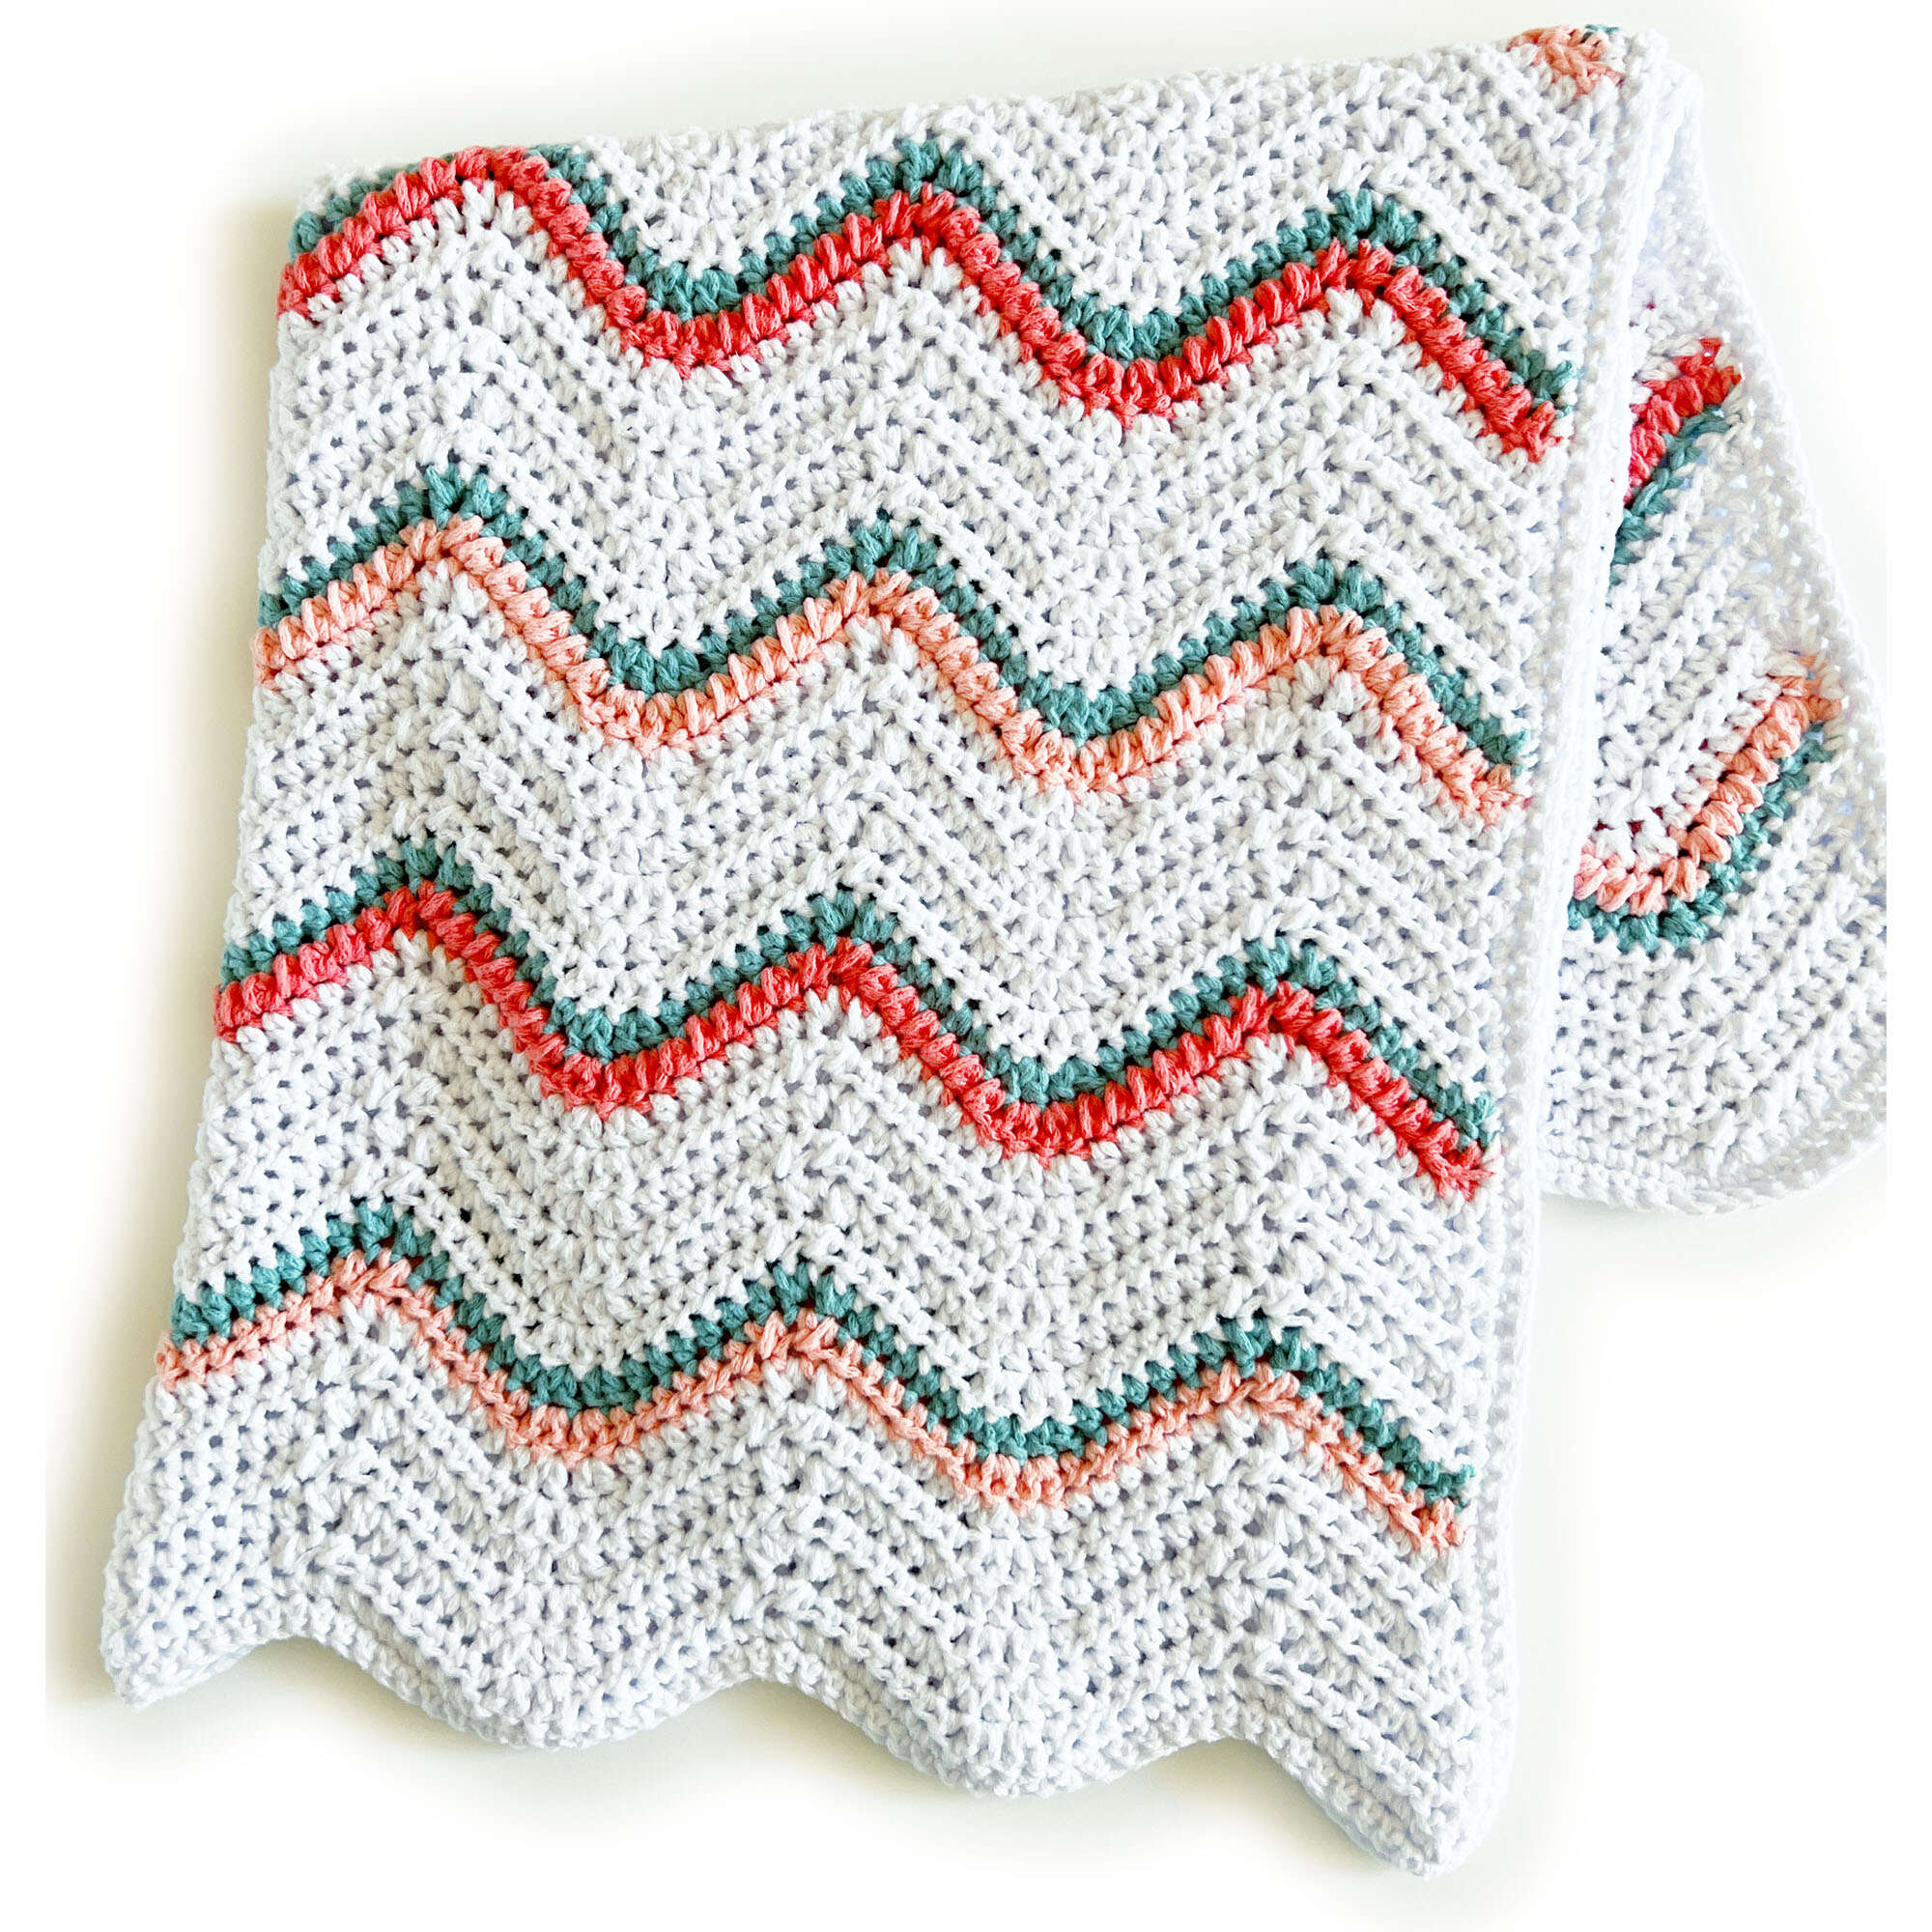 Crochet Baby James Blanket made by Annie - Daisy Farm Crafts